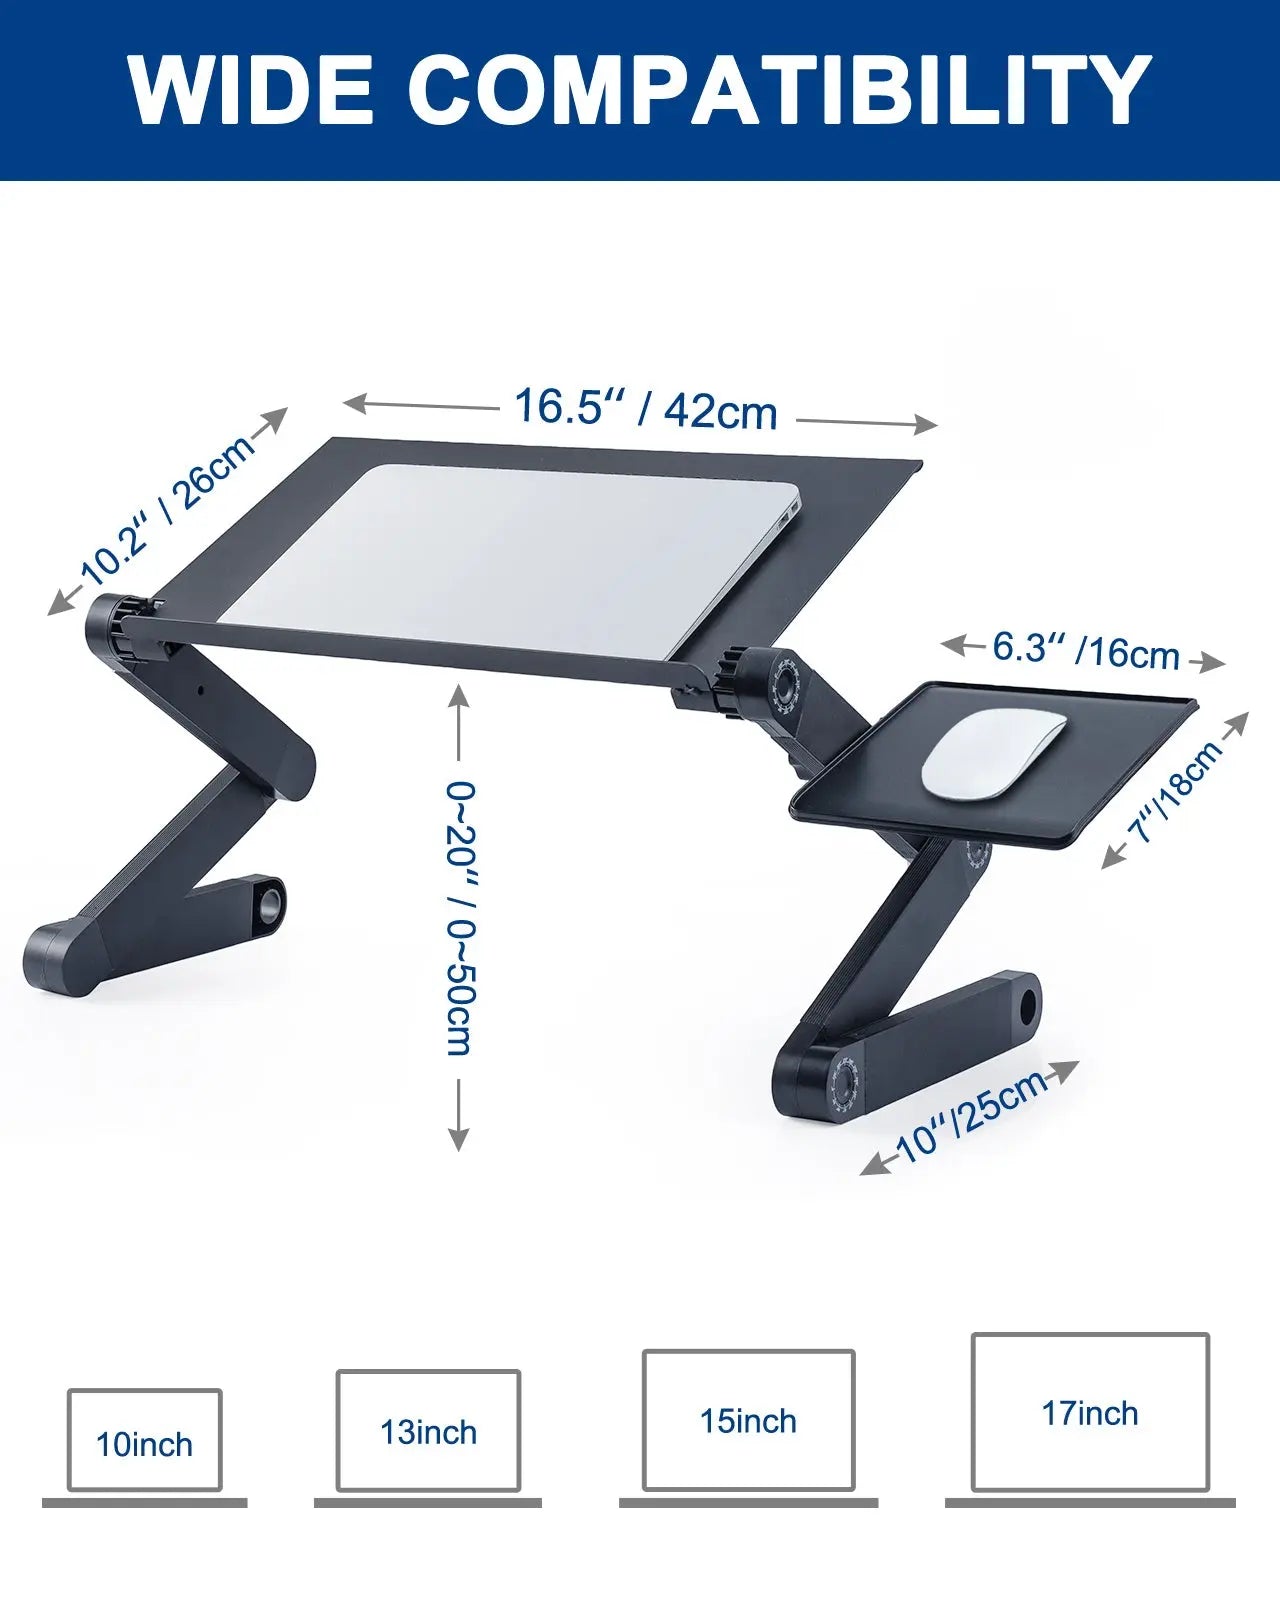 Adjustable Laptop Stand, RAINBEAN Laptop Desk with 2 CPU Cooling USB Fans for Bed Aluminum Lap Workstation Desk with Mouse Pad, Foldable Cook Book Stand Notebook Holder Sofa,Amazon Banned Open Market .Co